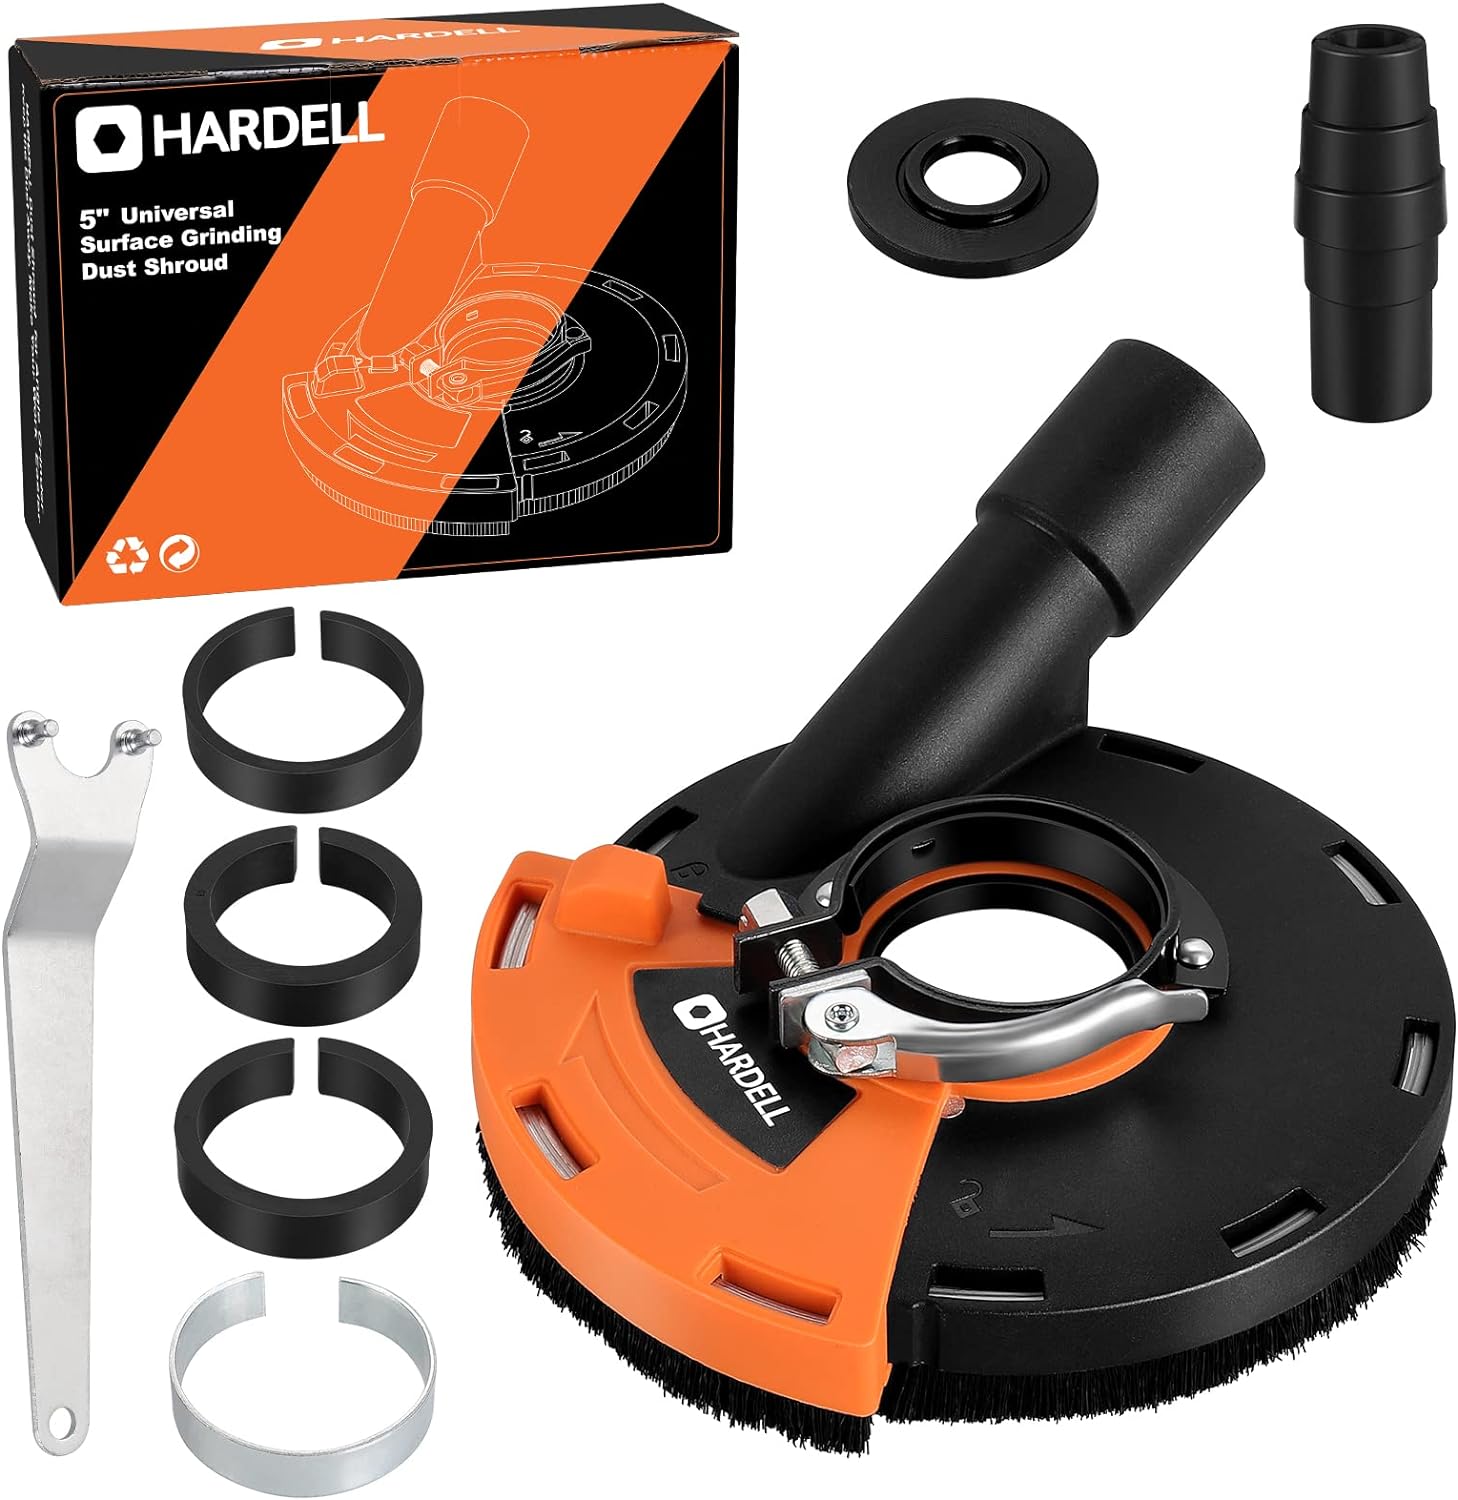 HARDELL Angle Grinder Dust Shroud 5 Inch, Angle Grinder Attachments, for Universal Angle Grinders(125MM)